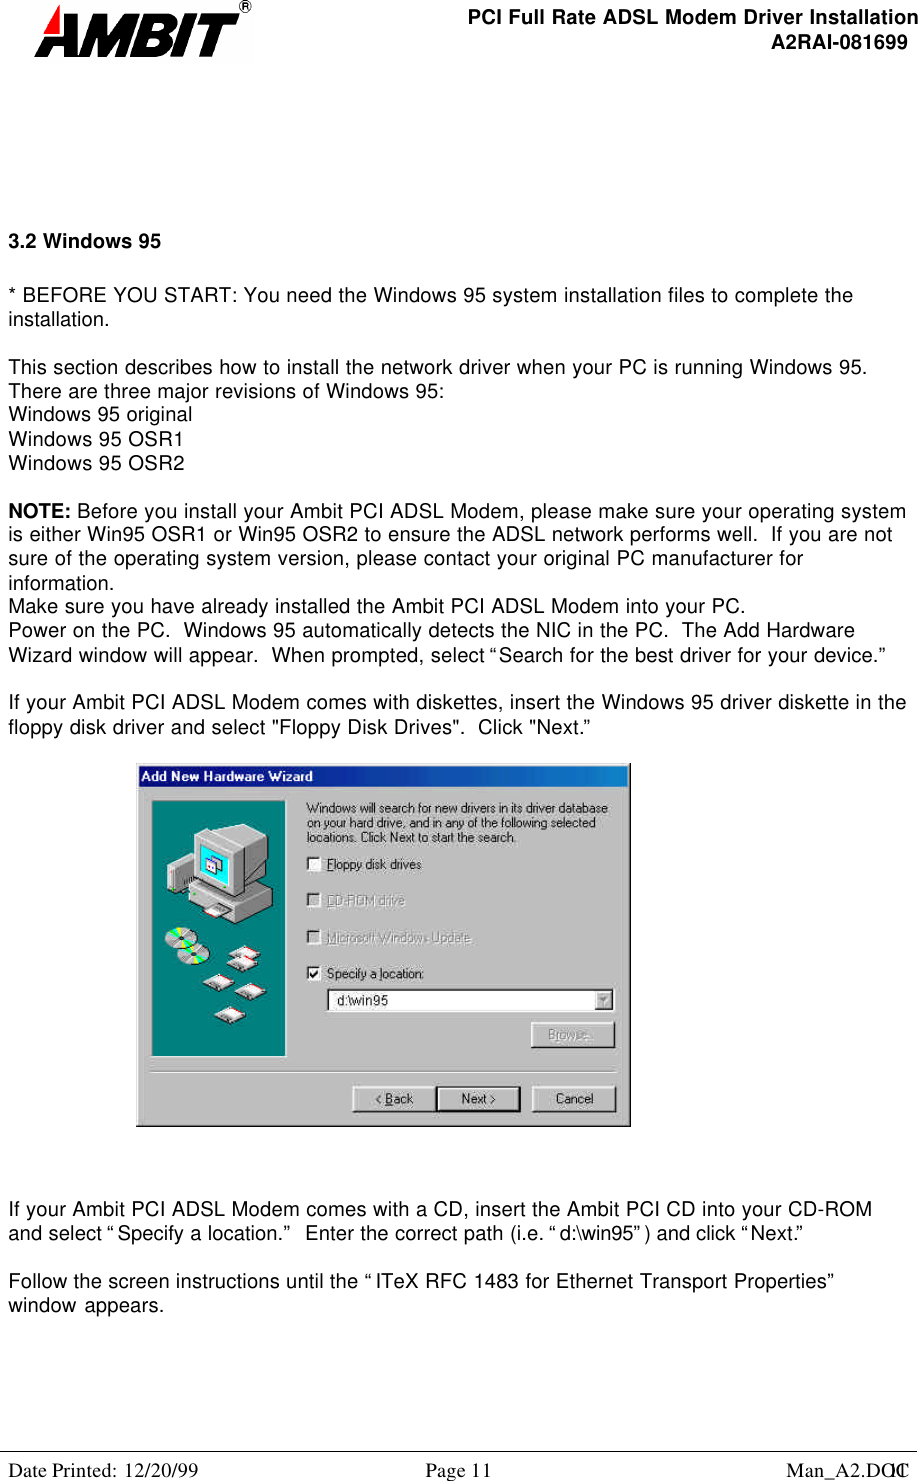 PCI Full Rate ADSL Modem Driver InstallationA2RAI-081699Date Printed: 12/20/99 Page 11 Man_A2.DOC113.2 Windows 95* BEFORE YOU START: You need the Windows 95 system installation files to complete theinstallation.This section describes how to install the network driver when your PC is running Windows 95.There are three major revisions of Windows 95:Windows 95 originalWindows 95 OSR1Windows 95 OSR2NOTE: Before you install your Ambit PCI ADSL Modem, please make sure your operating systemis either Win95 OSR1 or Win95 OSR2 to ensure the ADSL network performs well.  If you are notsure of the operating system version, please contact your original PC manufacturer forinformation.Make sure you have already installed the Ambit PCI ADSL Modem into your PC.Power on the PC.  Windows 95 automatically detects the NIC in the PC.  The Add HardwareWizard window will appear.  When prompted, select “Search for the best driver for your device.”If your Ambit PCI ADSL Modem comes with diskettes, insert the Windows 95 driver diskette in thefloppy disk driver and select &quot;Floppy Disk Drives&quot;.  Click &quot;Next.”If your Ambit PCI ADSL Modem comes with a CD, insert the Ambit PCI CD into your CD-ROMand select “Specify a location.”  Enter the correct path (i.e. “d:\win95”) and click “Next.”Follow the screen instructions until the “ITeX RFC 1483 for Ethernet Transport Properties”window appears.